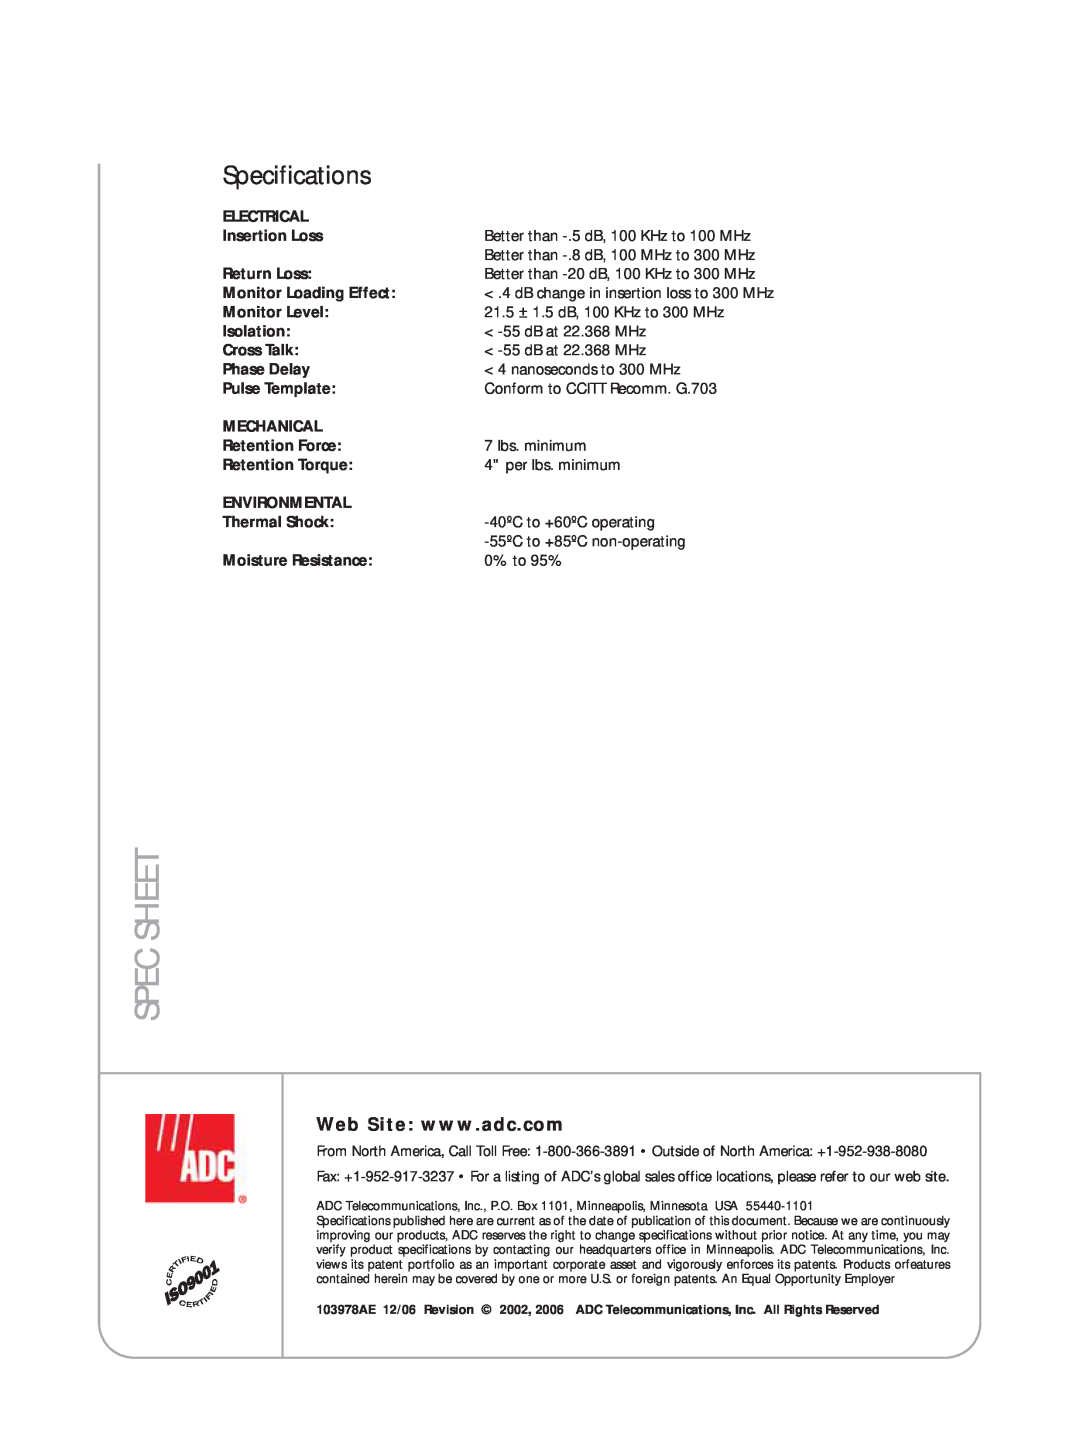 ADC 75 Ohm Interconnect manual Specifications, Spec Sheet 